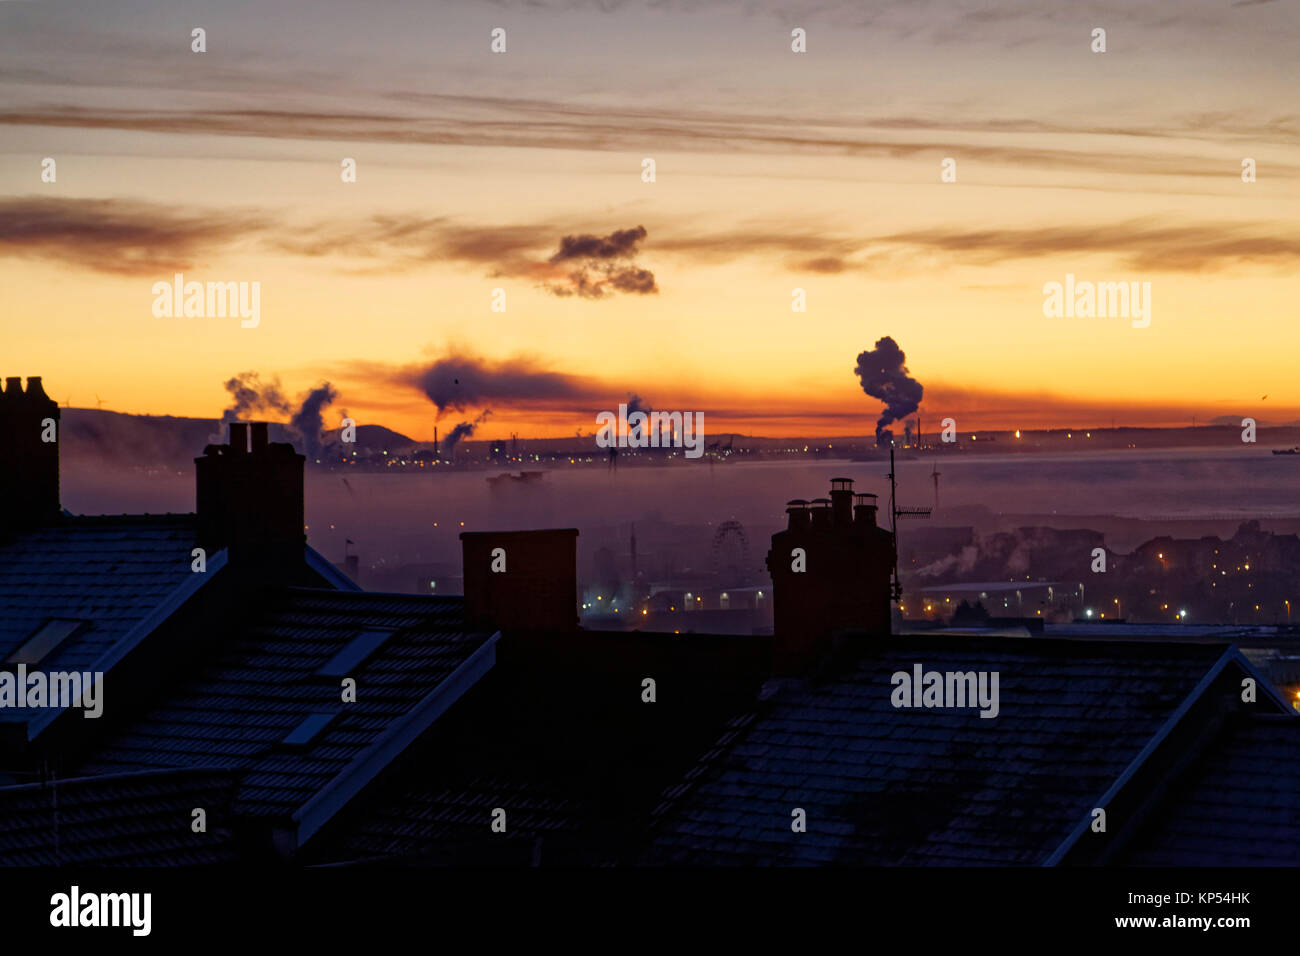 Smoke from Port Talbot Steel Works is visible in the horizon, seen over roof tops during an early frosty morning in Swansea, Wales, UK. Tuesday 12 Dec Stock Photo